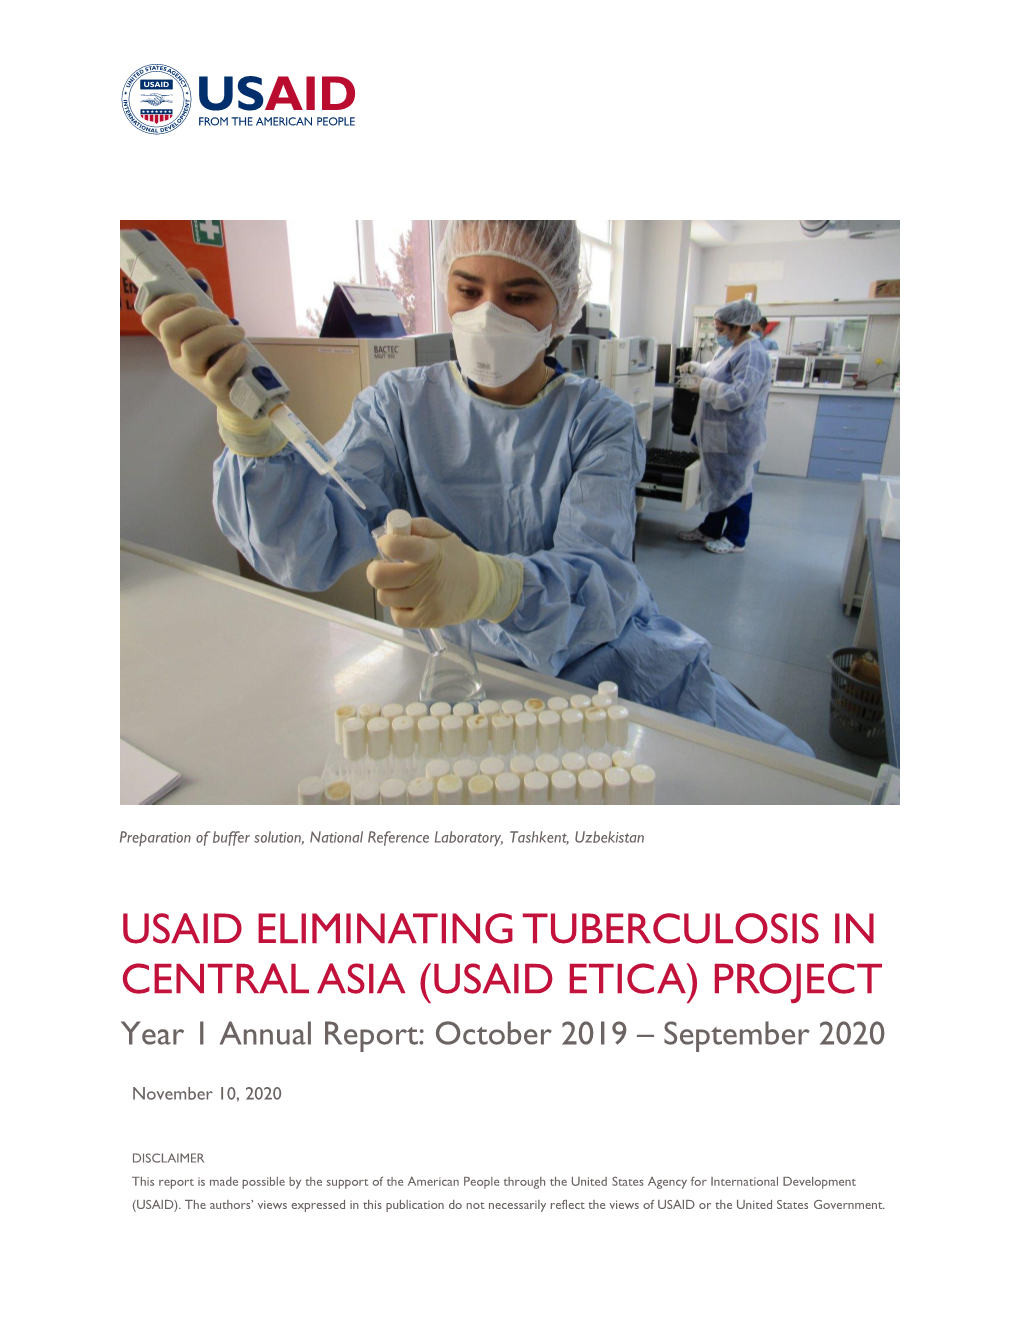 USAID ELIMINATING TUBERCULOSIS in CENTRAL ASIA (USAID ETICA) PROJECT Year 1 Annual Report: October 2019 – September 2020